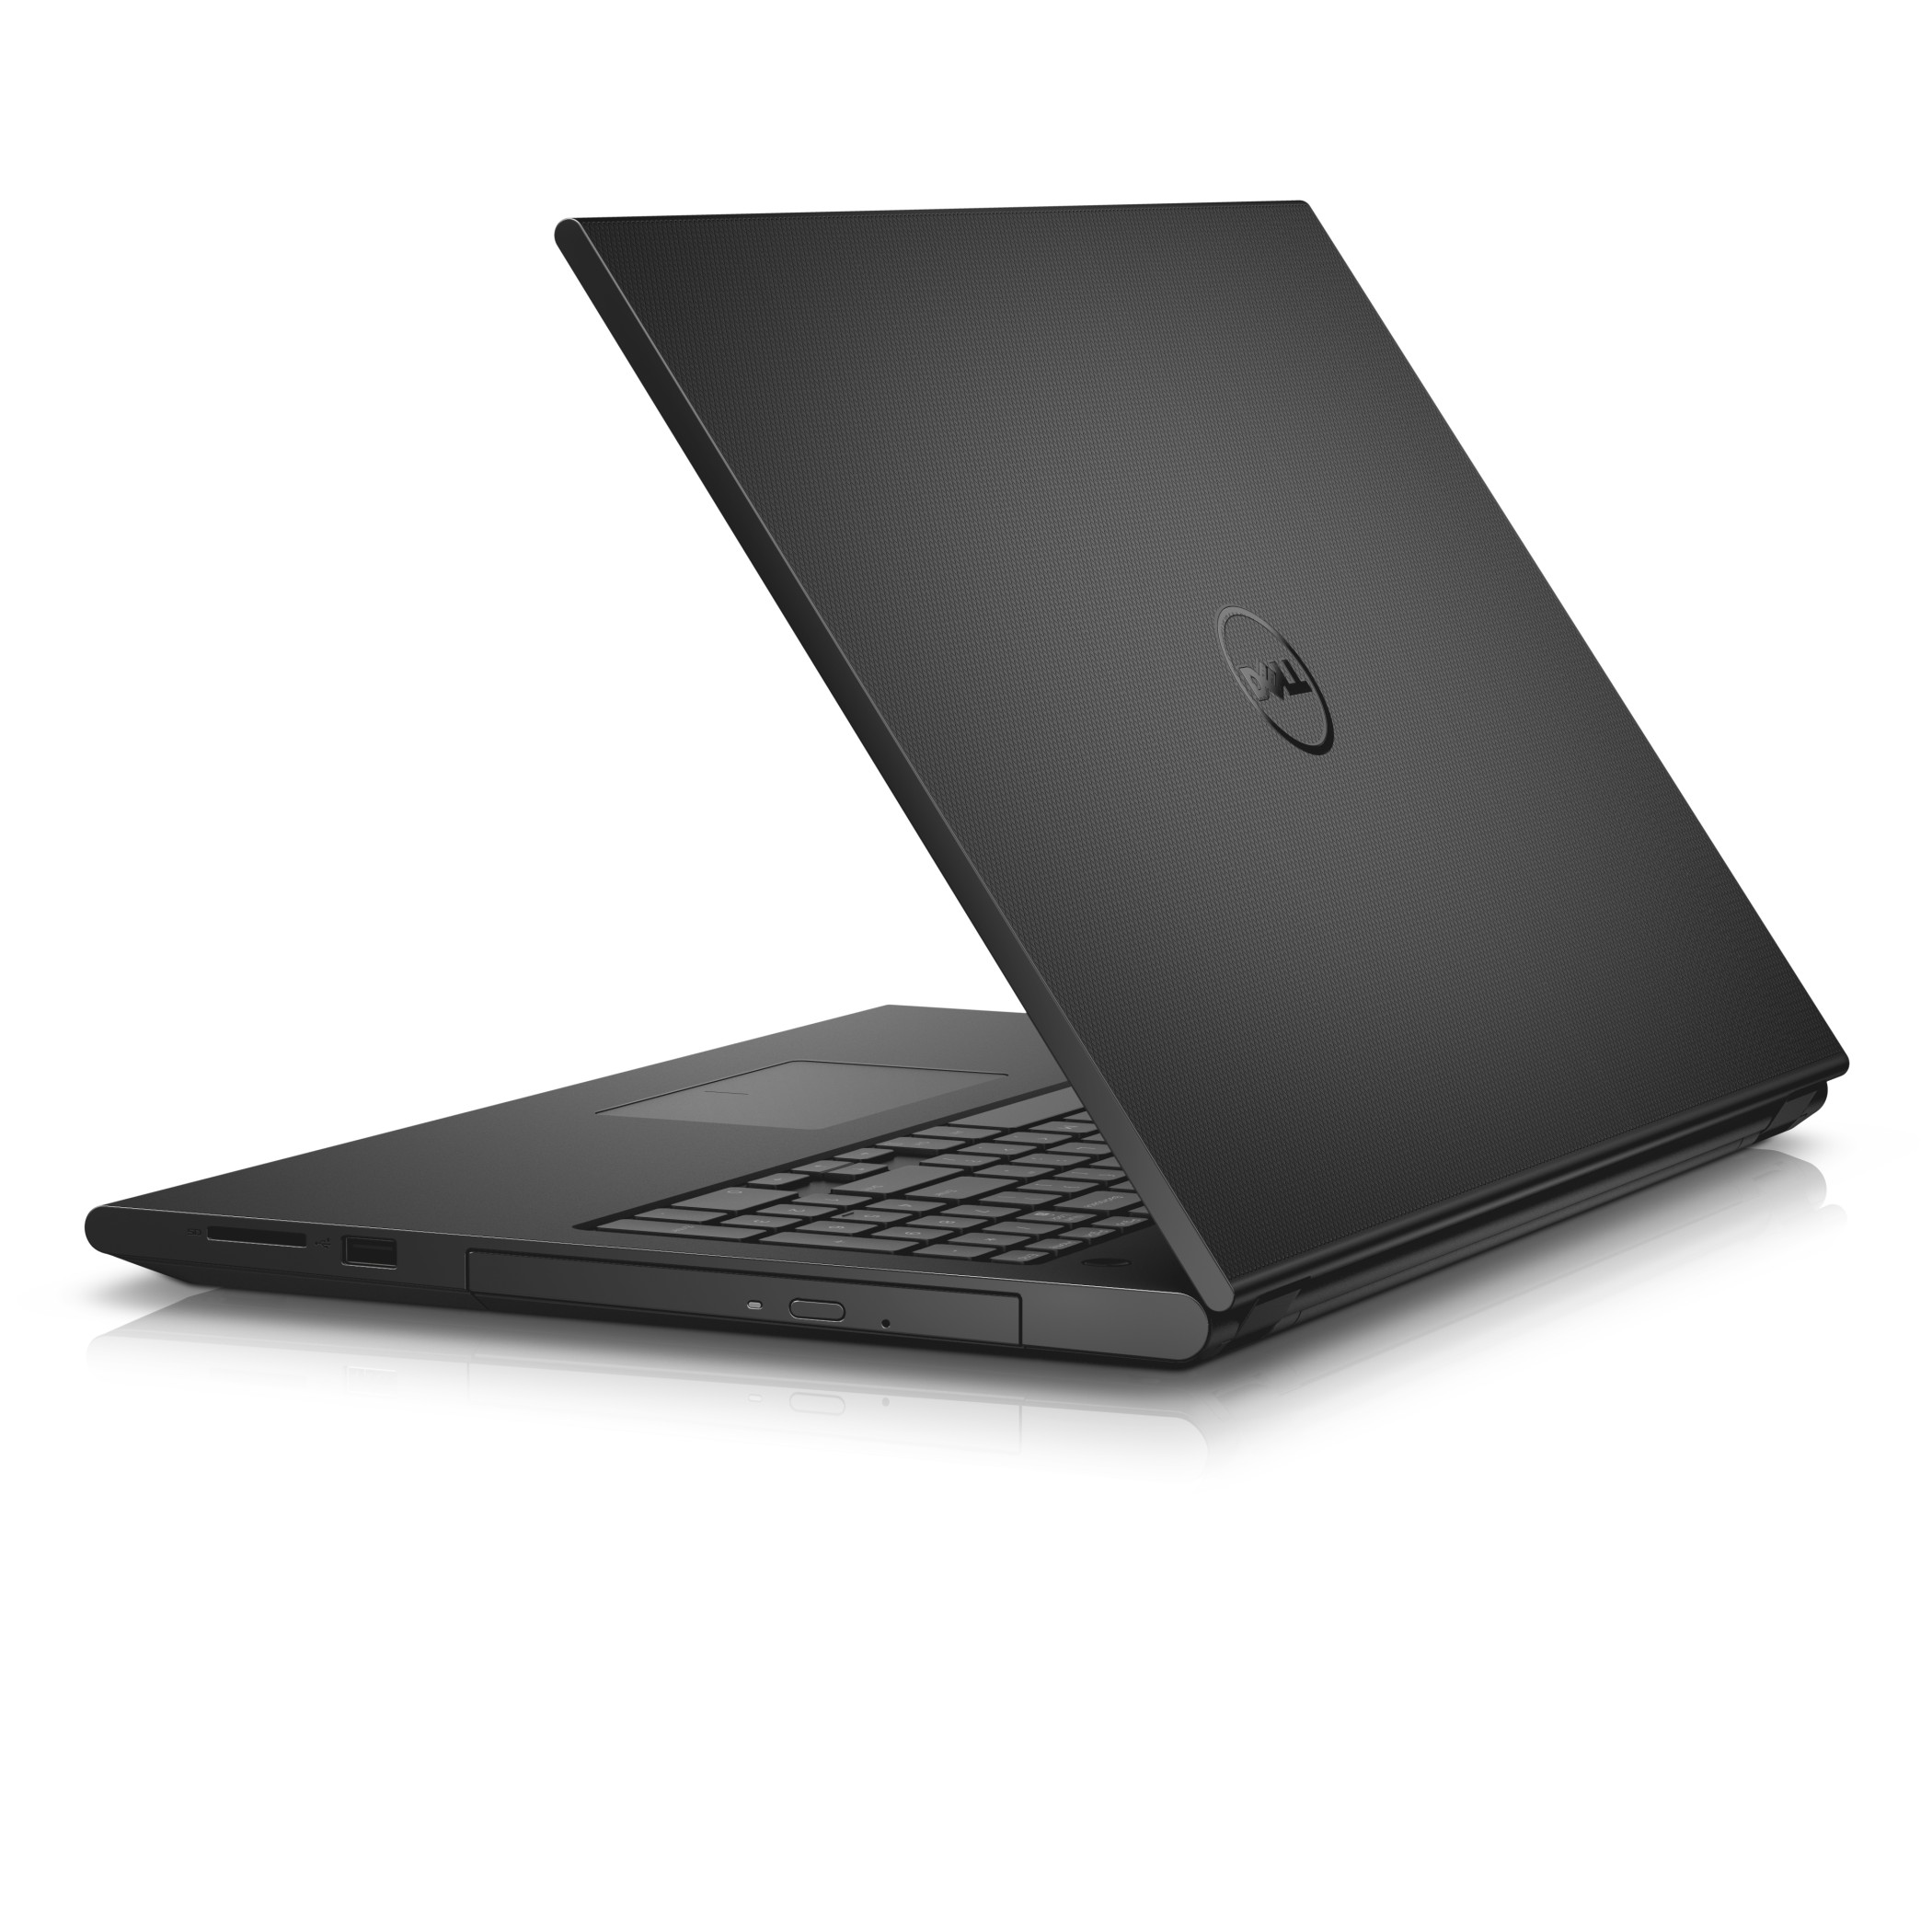 Dell Inspiron 15 3000 Series Non-Touch (Model 3543) notebook computer, with Broadwell processor.